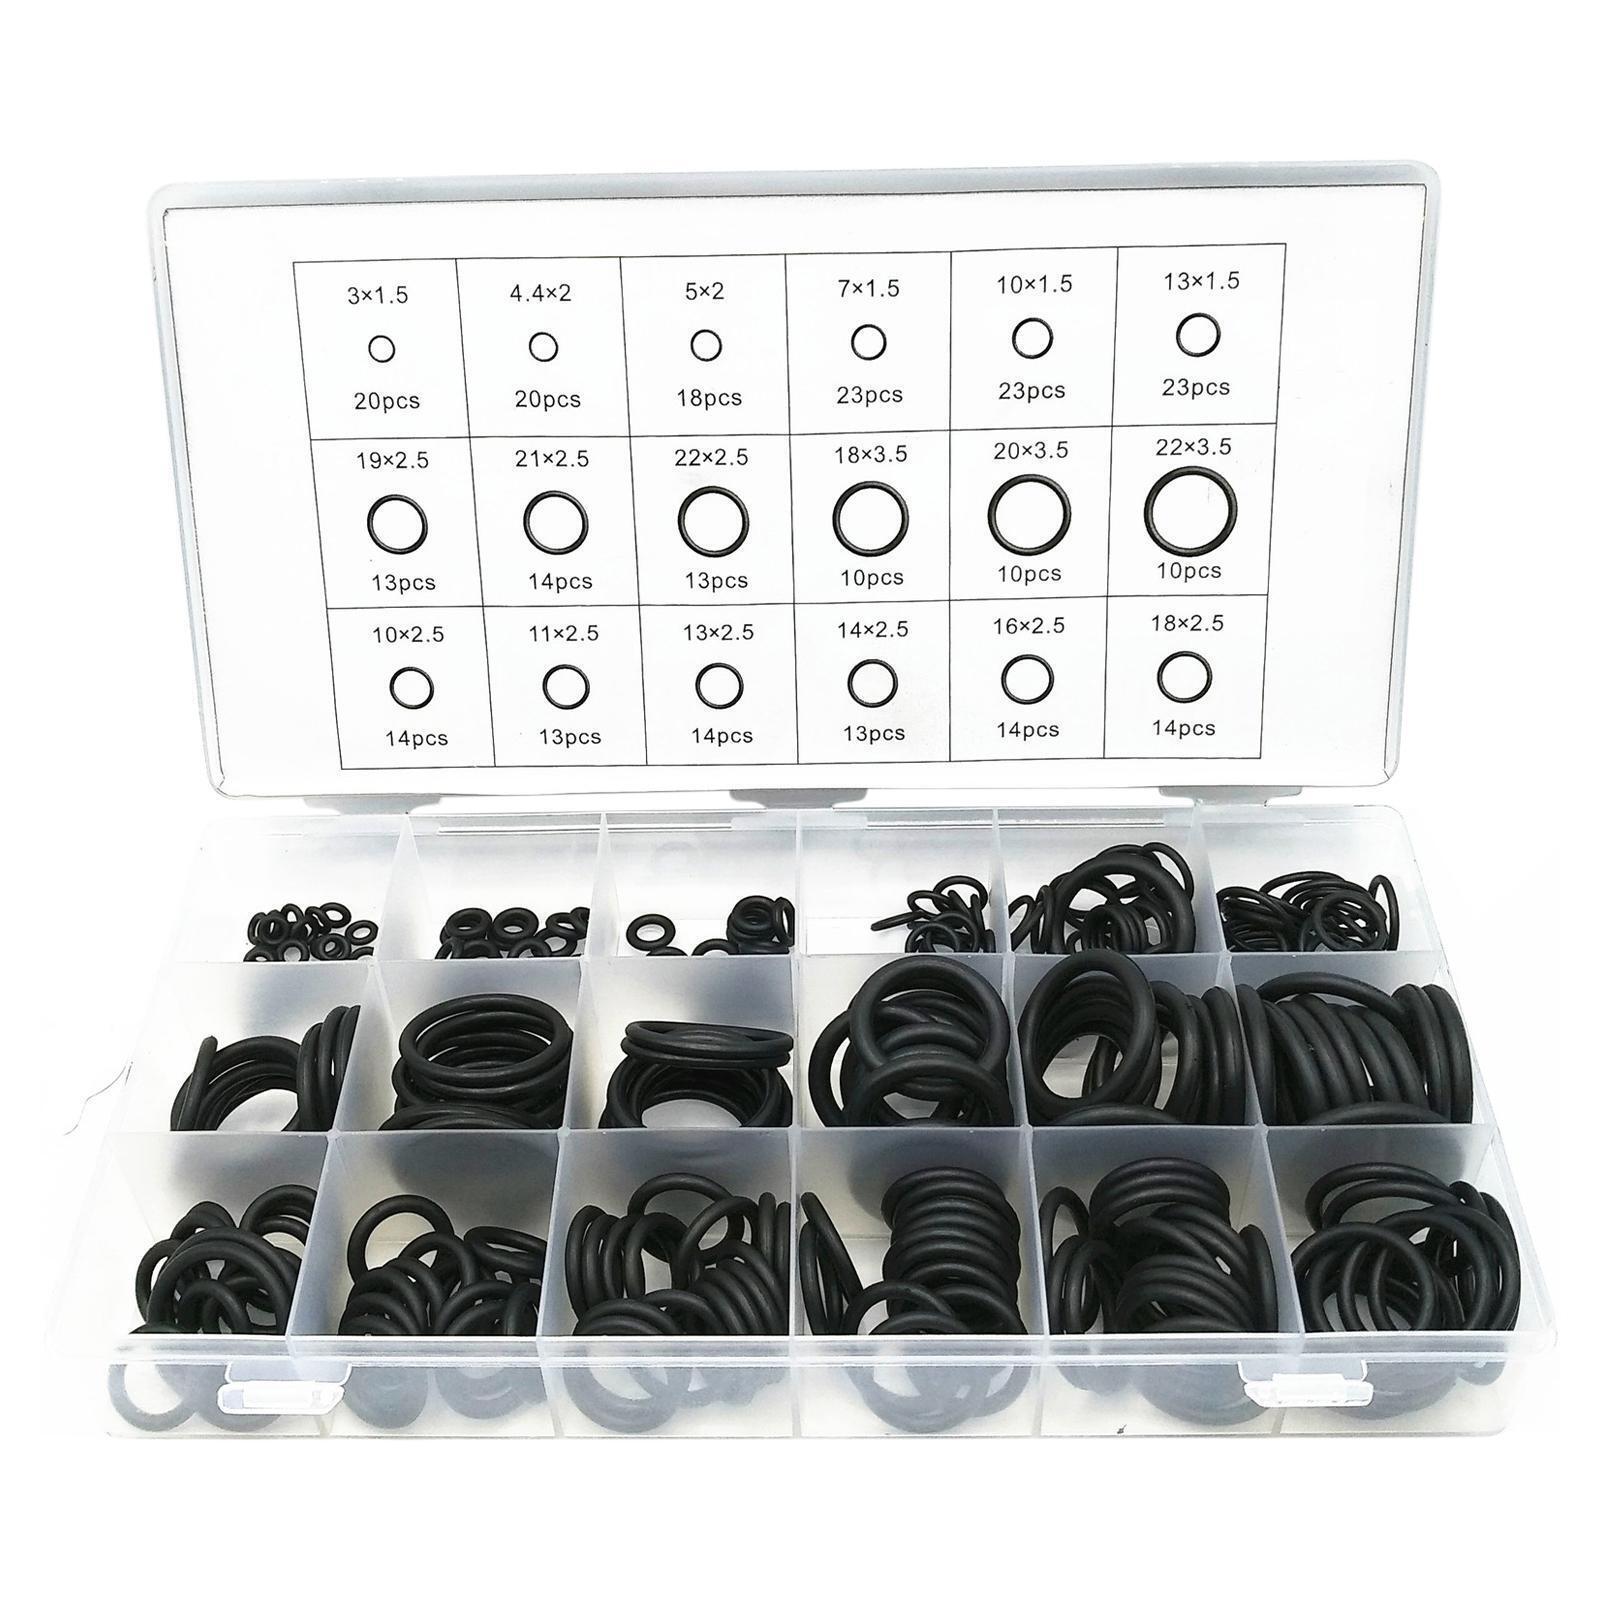 279 piece O Ring Assortment Kit - South East Clearance Centre